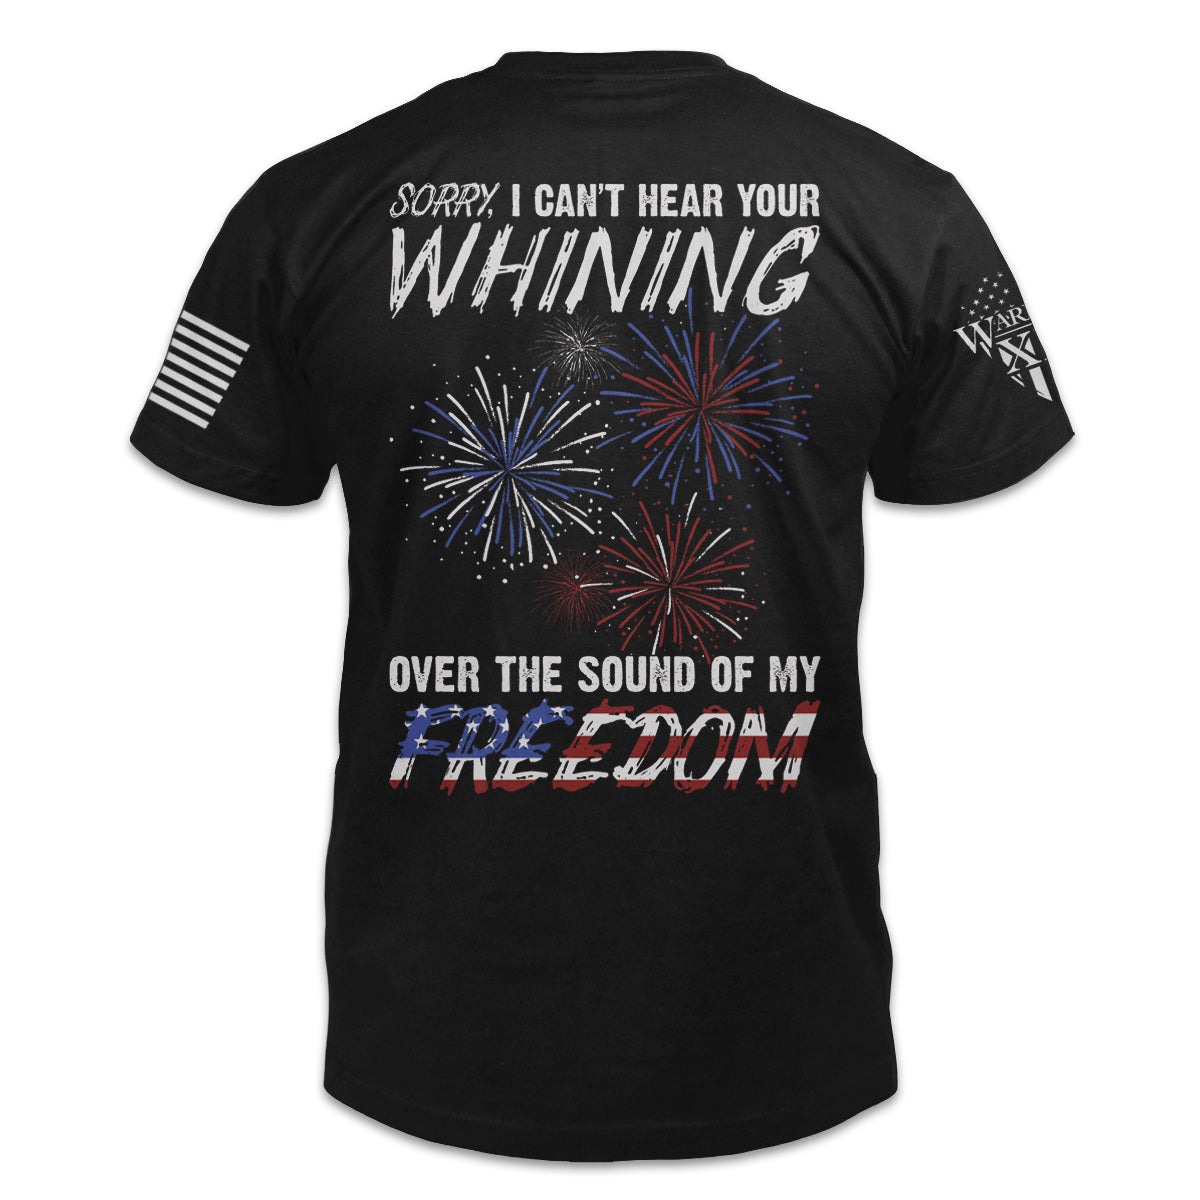 A black t-shirt with the words "Sorry, I can't hear your whining over the sound of my freedom." with exploding fireworks printed on the back of the shirt.